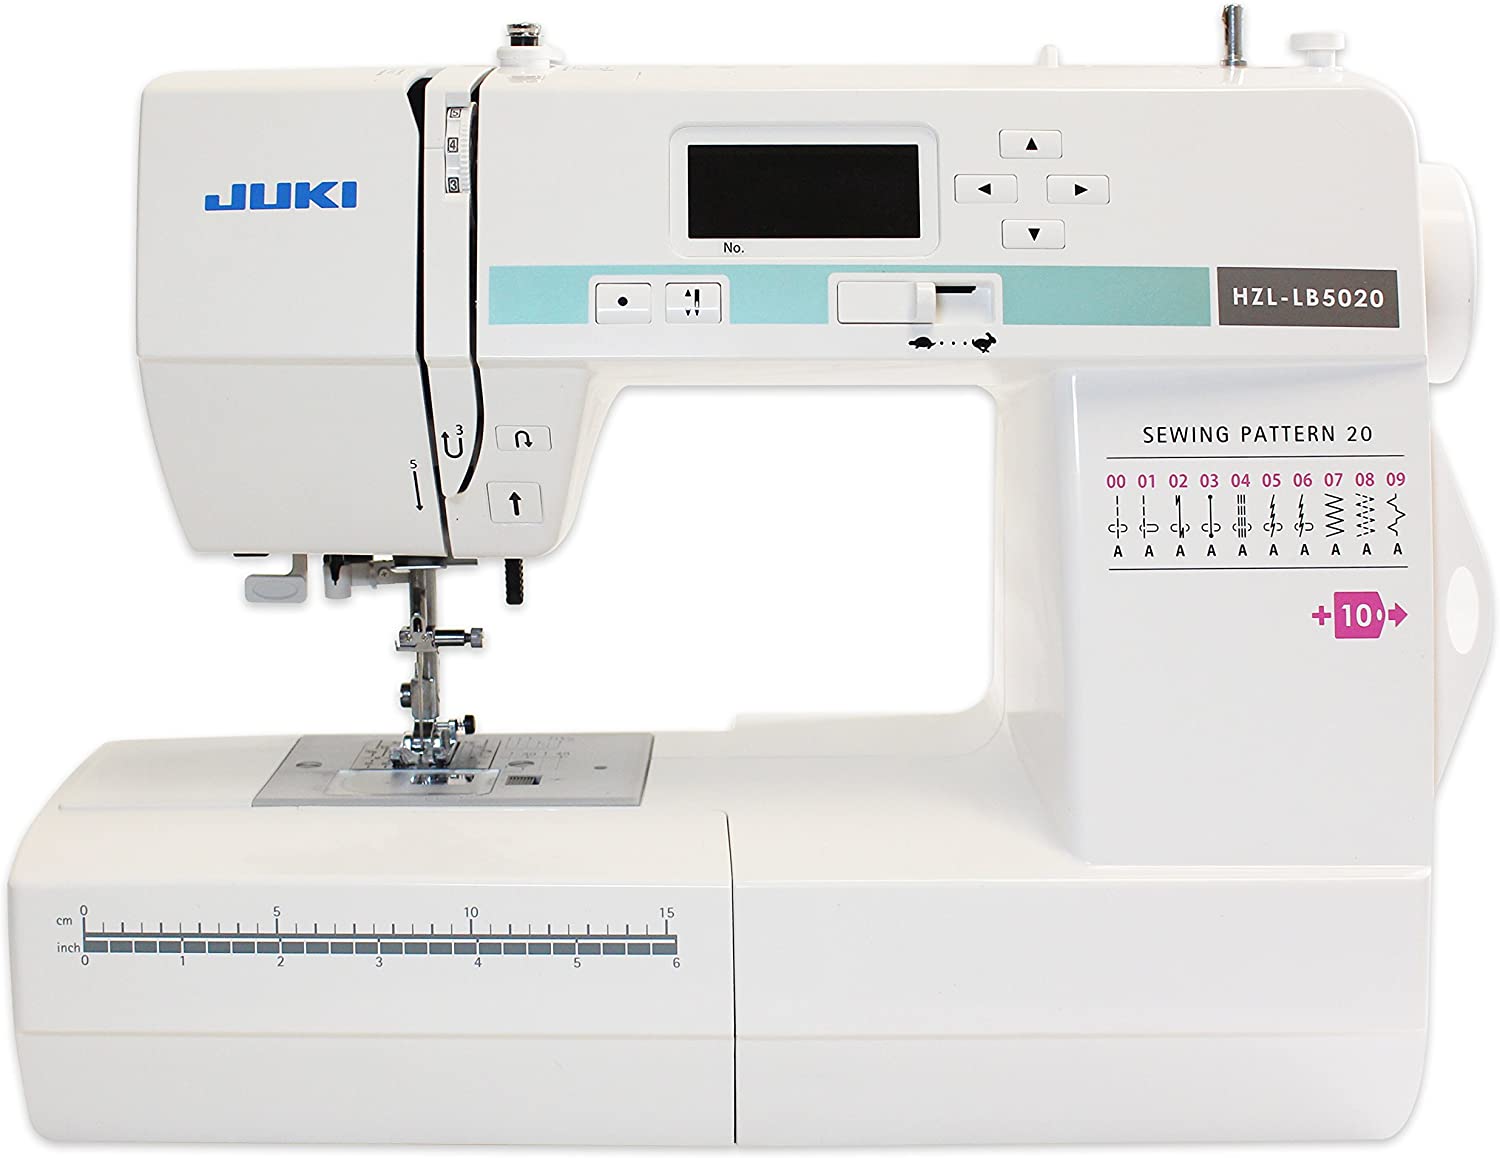 JUKI F600 Quilt and Pro Special Sewing Machine